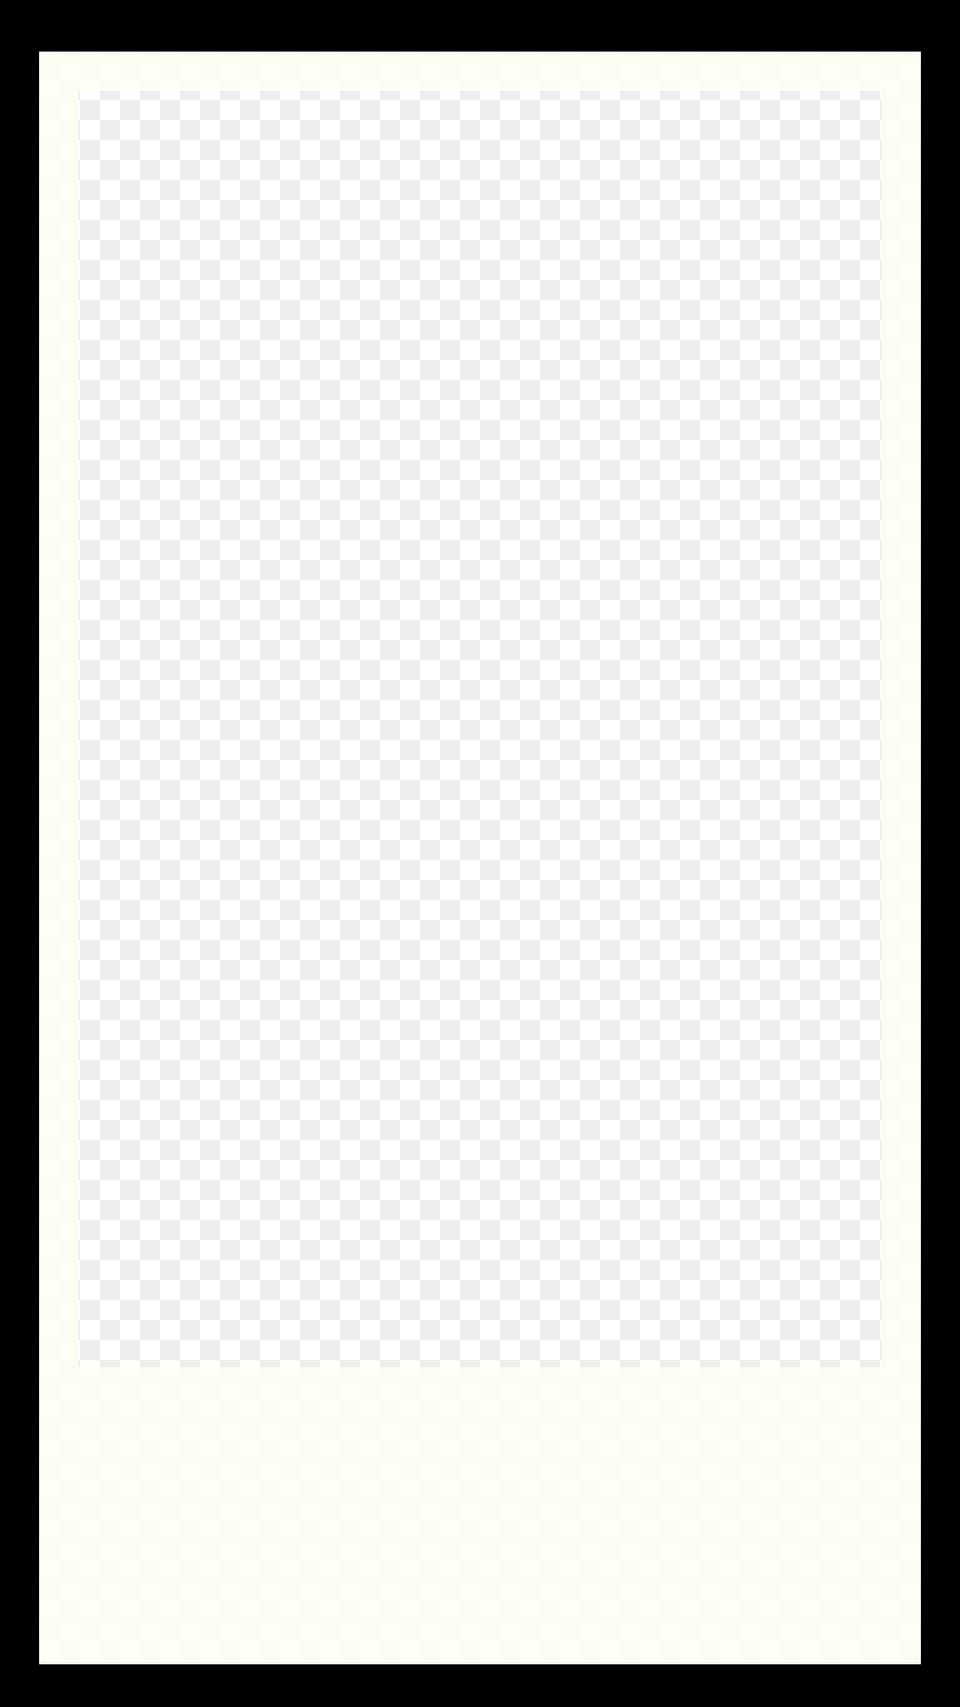 Polaroid Snapchat Filter Geofilter Maker On Filterpop, Page, Text Free Png